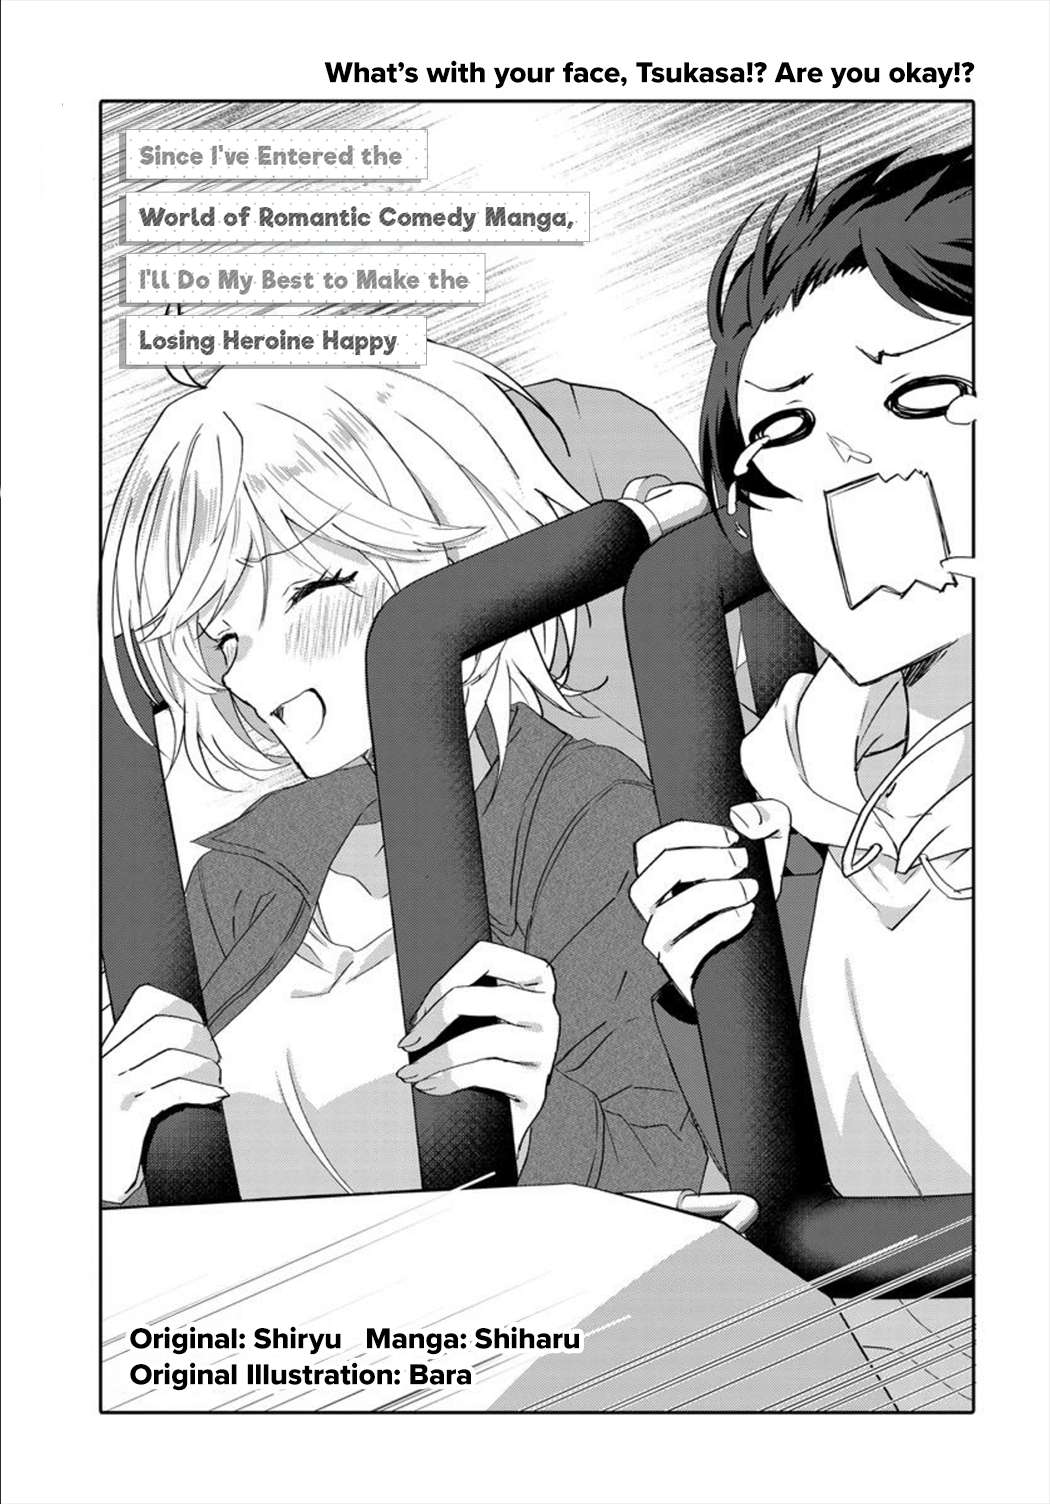 Since I’ve Entered the World of Romantic Comedy Manga, I’ll Do My Best to Make the Losing Heroine Happy. - chapter 7.1 - #5